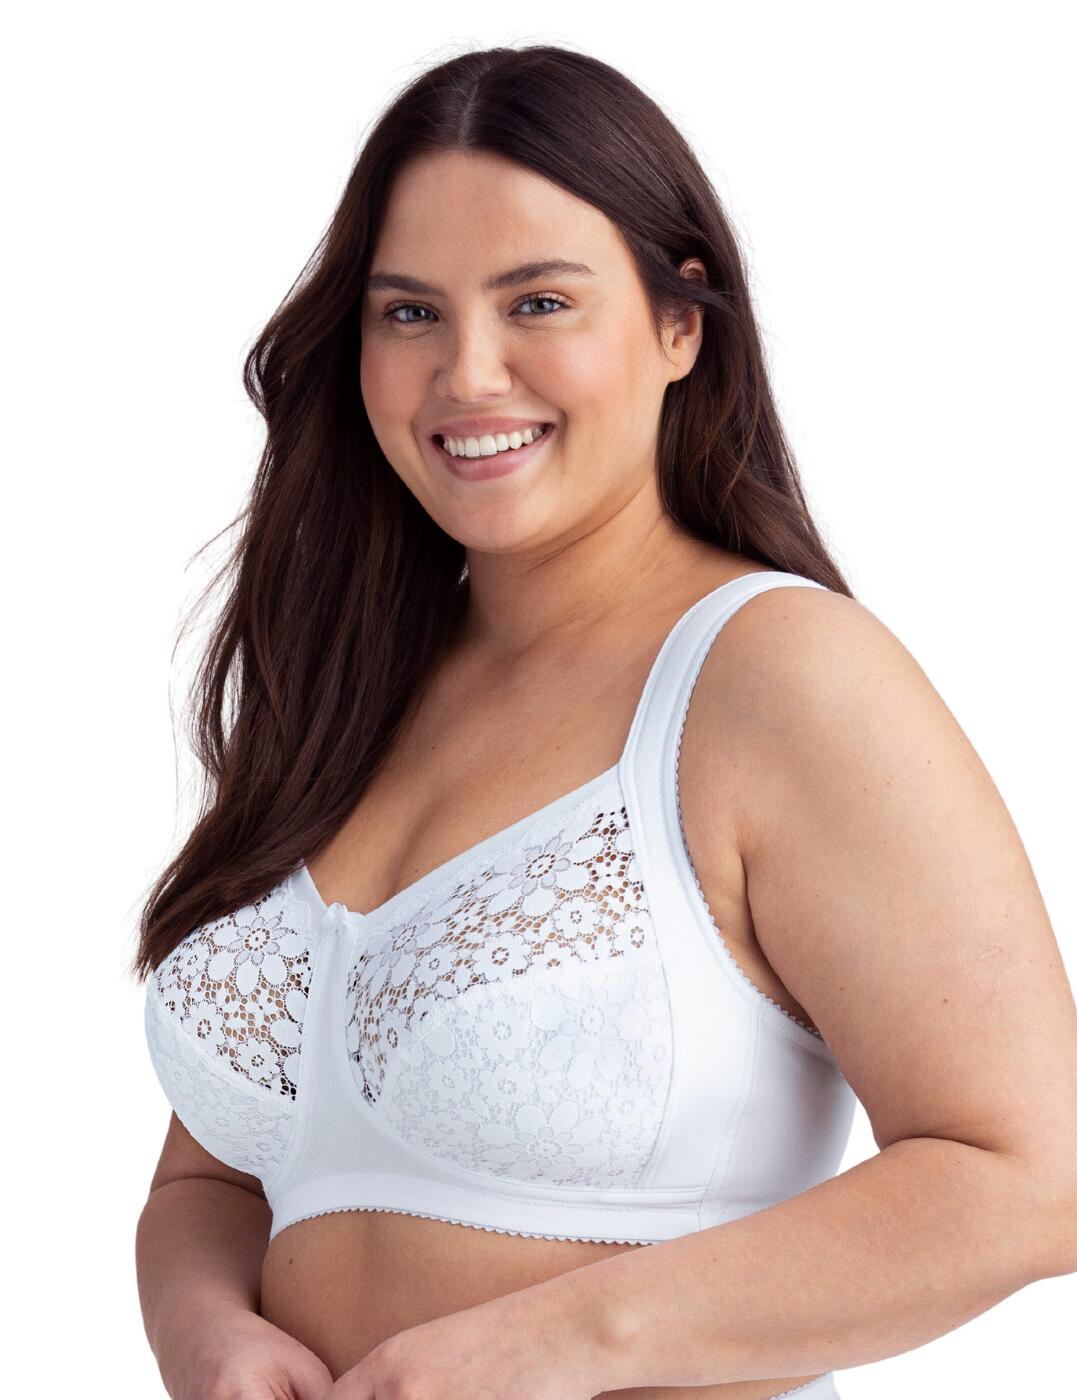 Miss Mary of Sweden Star Women's Non-Wired Full Cup Cotton Bra